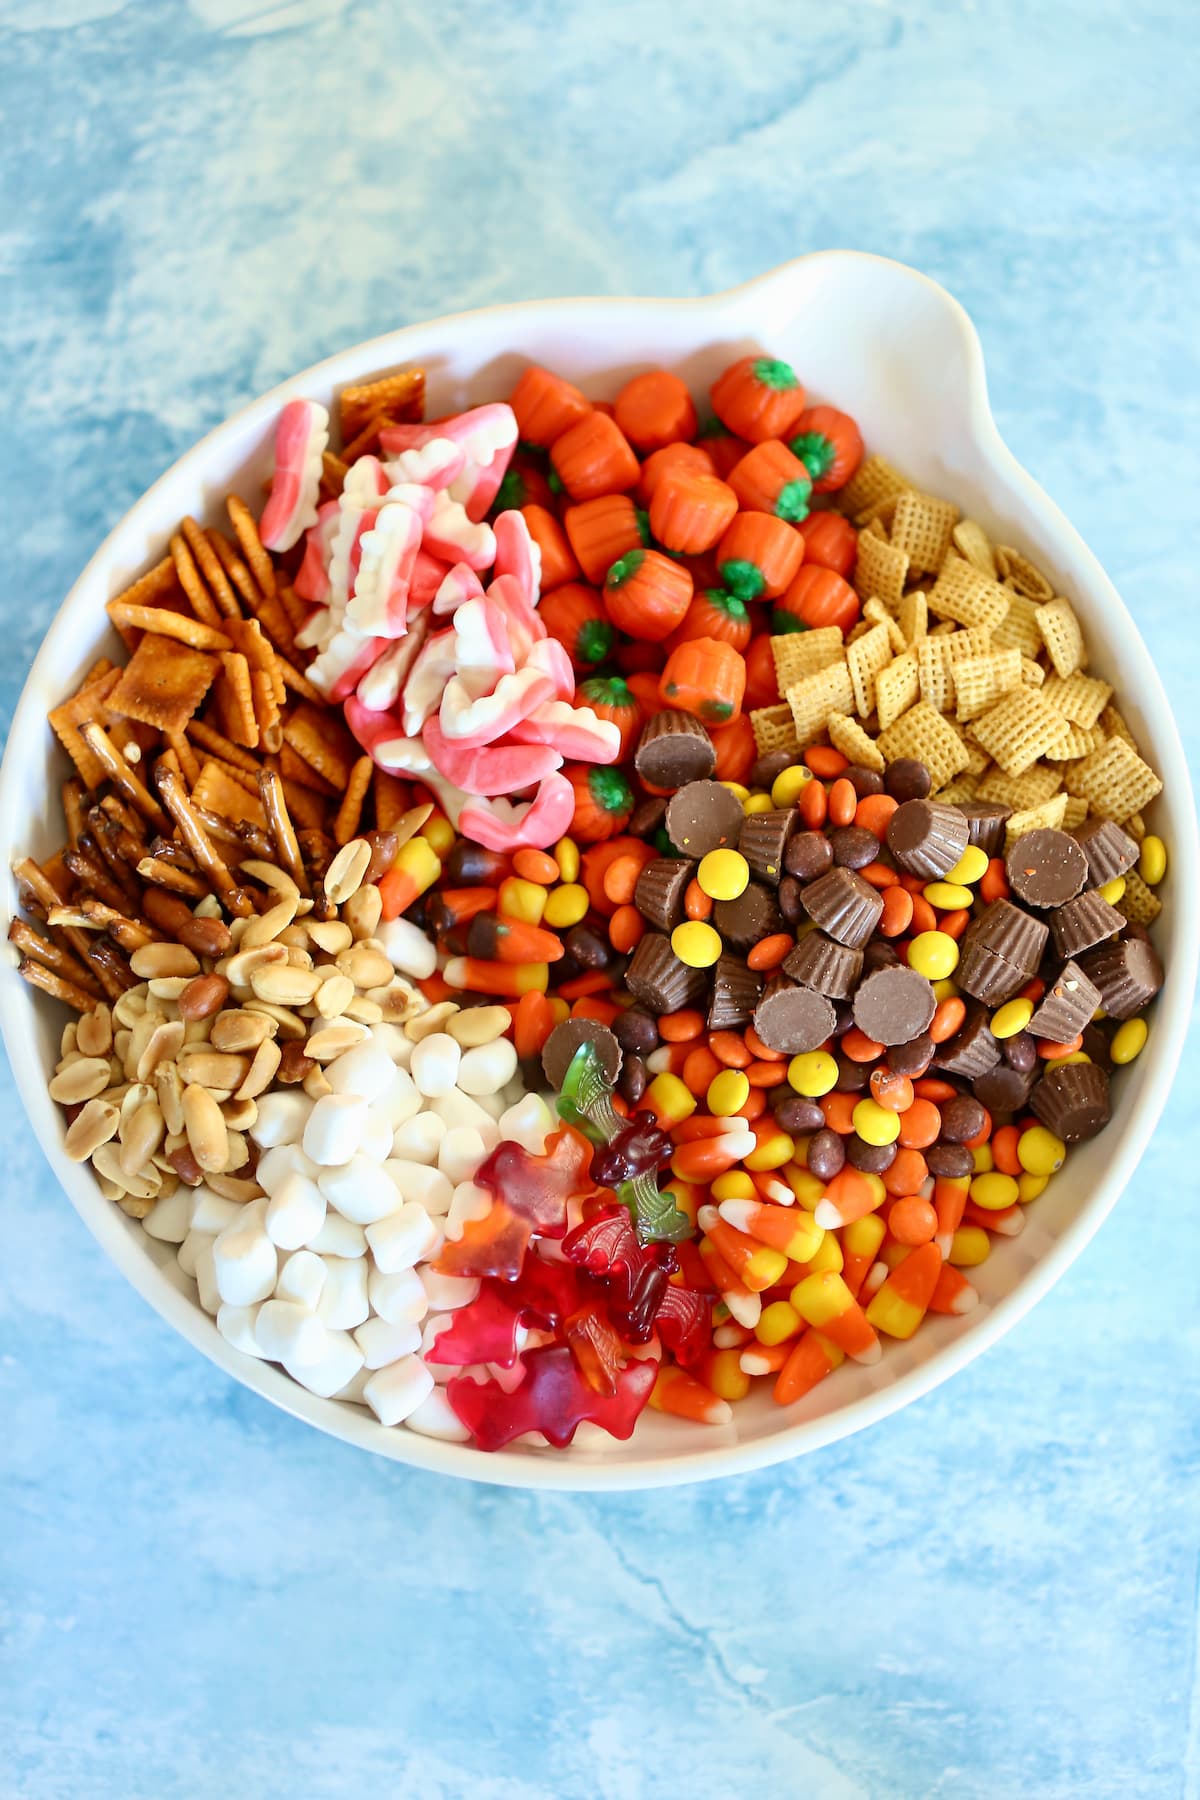 A large bowl of fall snack mix ingredients like pretzels, cheese crackers, peanuts and seasonal candy.